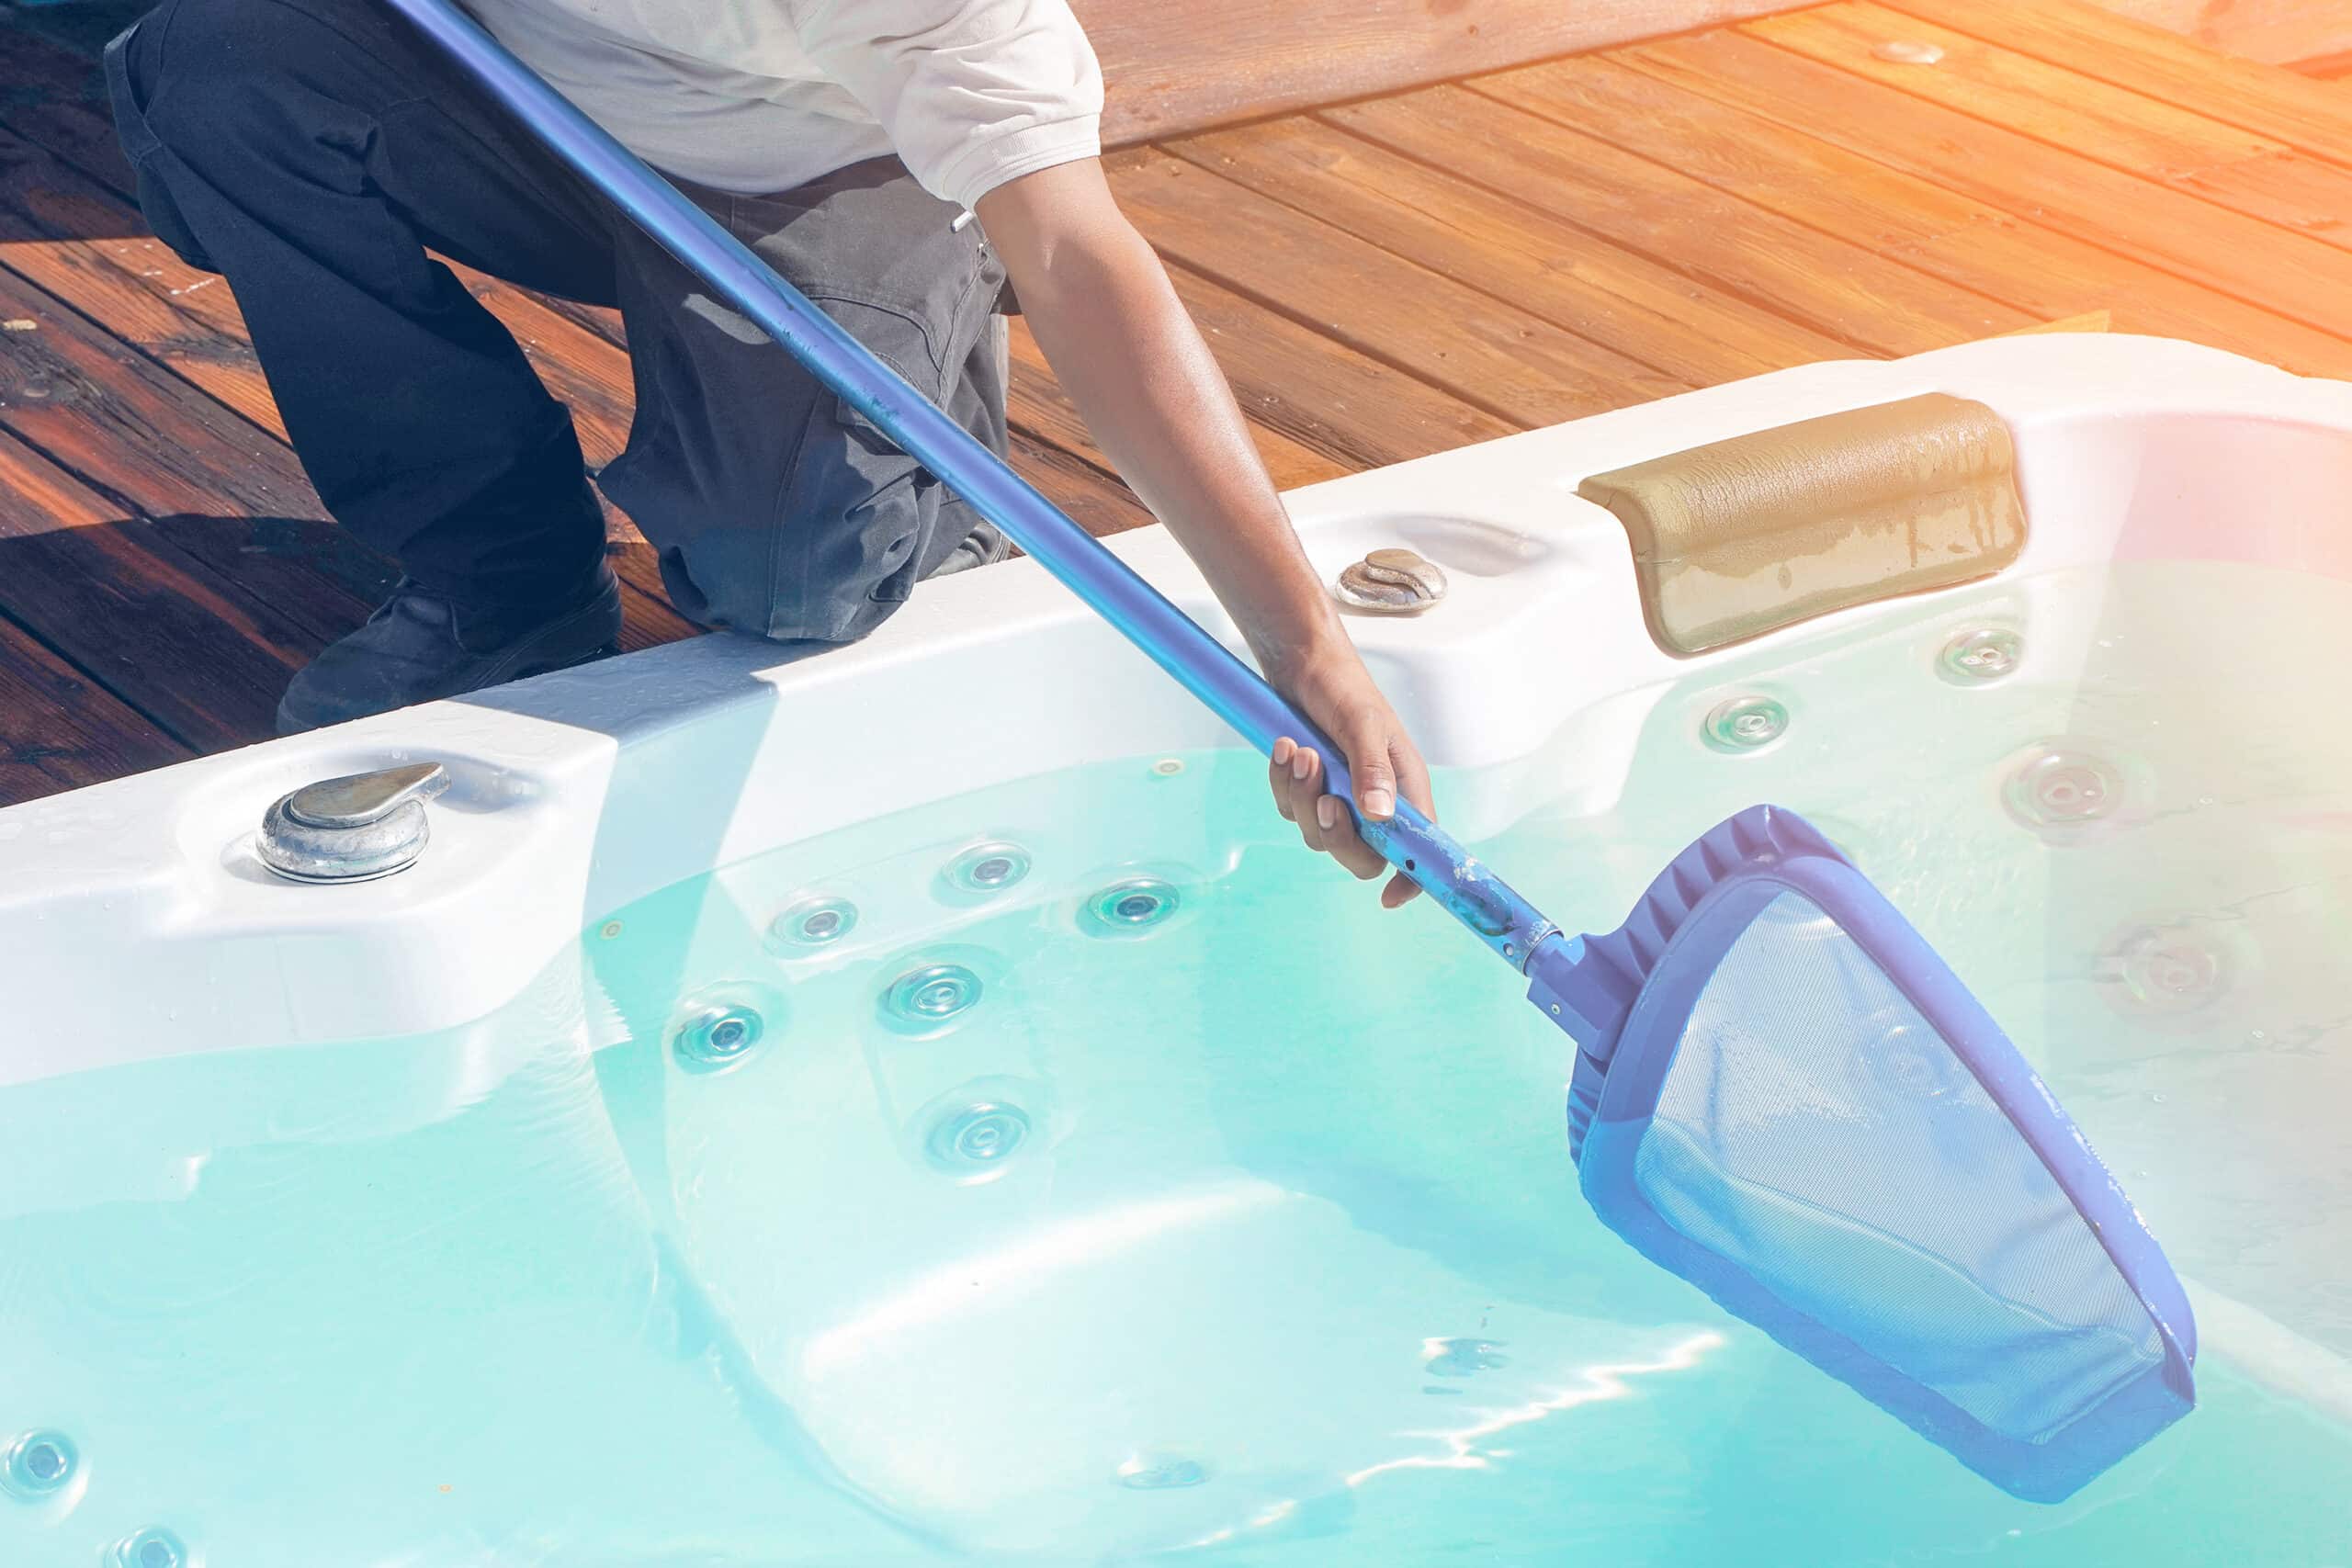 In Ground Hot Tubs Hot Tub Maintenance Hot Tubs IN Ground Pools Immerspa Cleaning Hot Tub inground hot tub